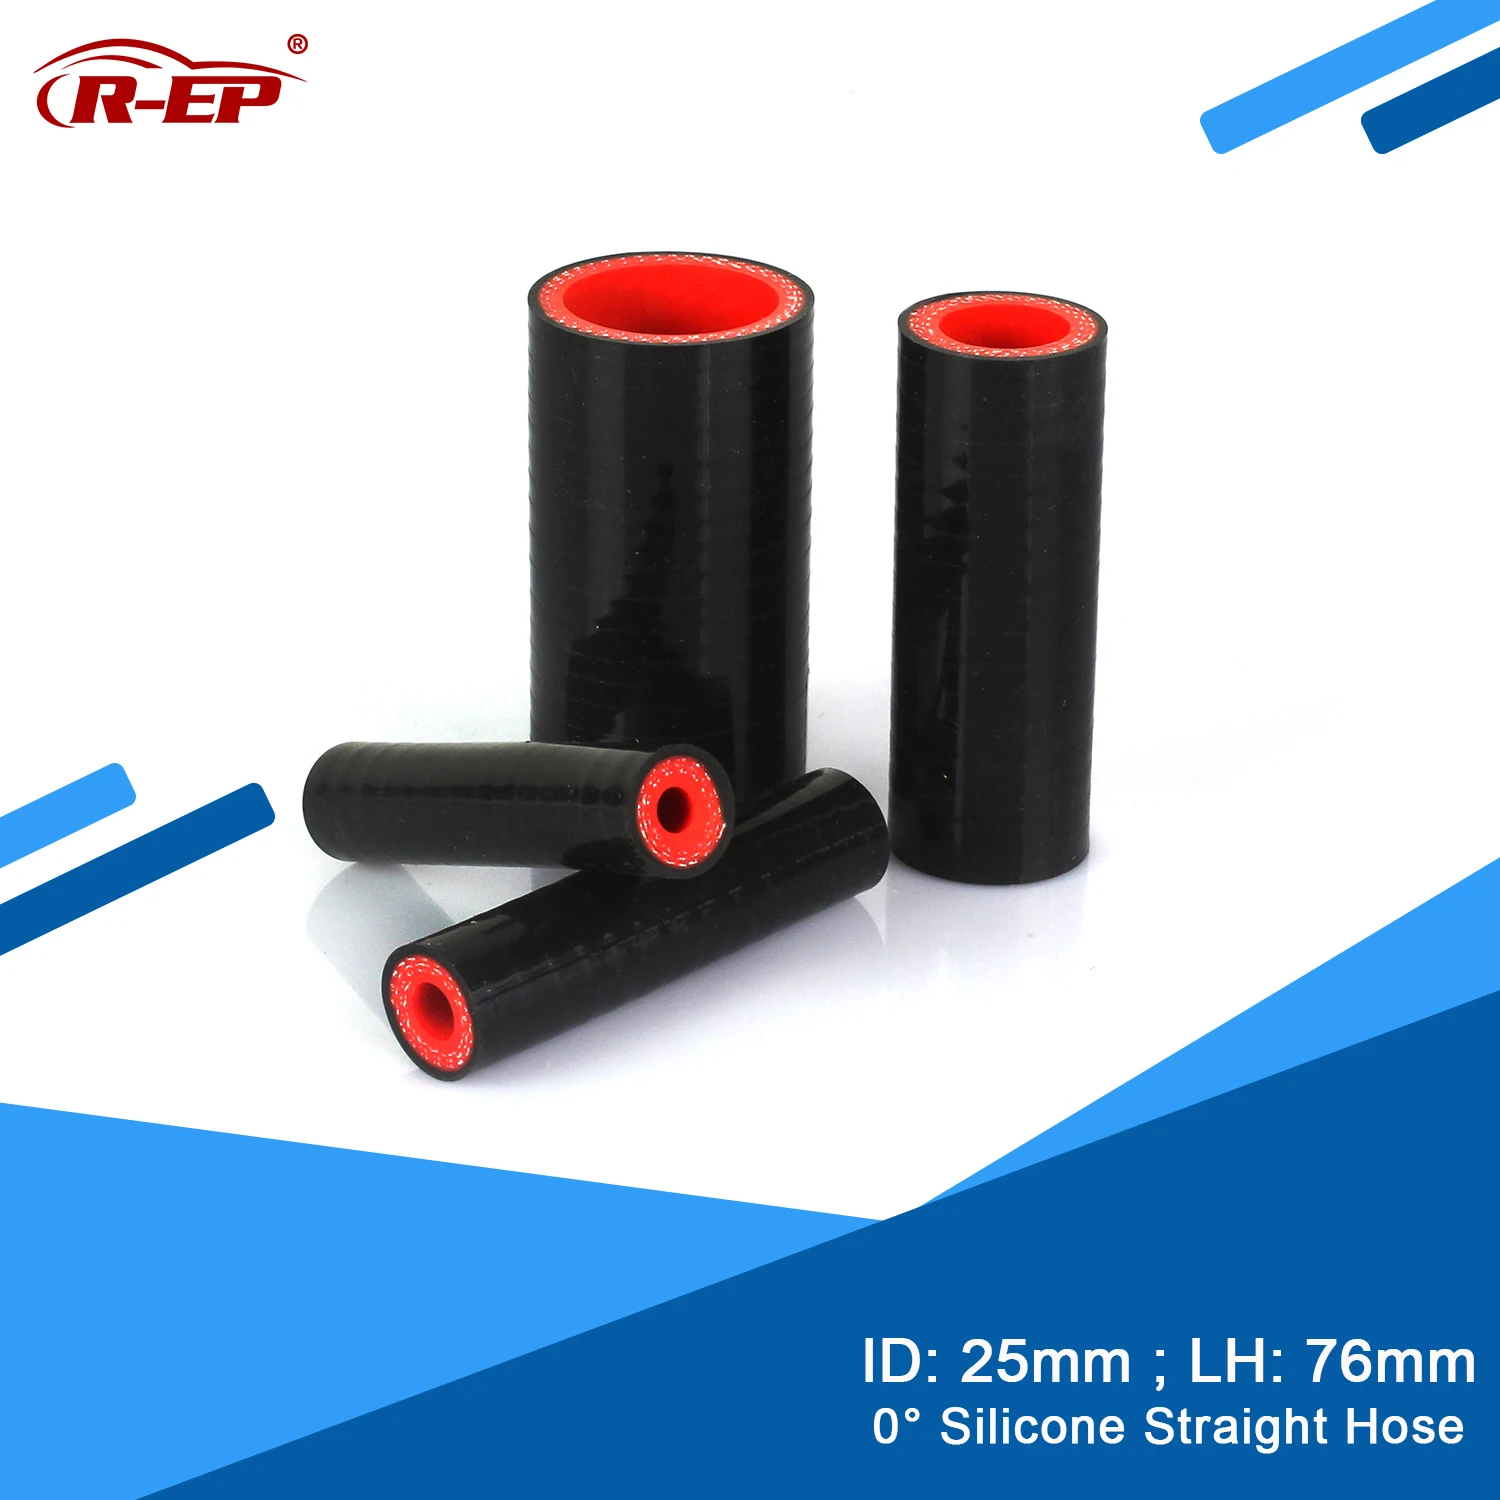 

R-EP 0 degree Straight Silicone Hose/Tube 25MM tube turbine Cold air intake Pipe Rubber Joiner Intercooler New Silicone